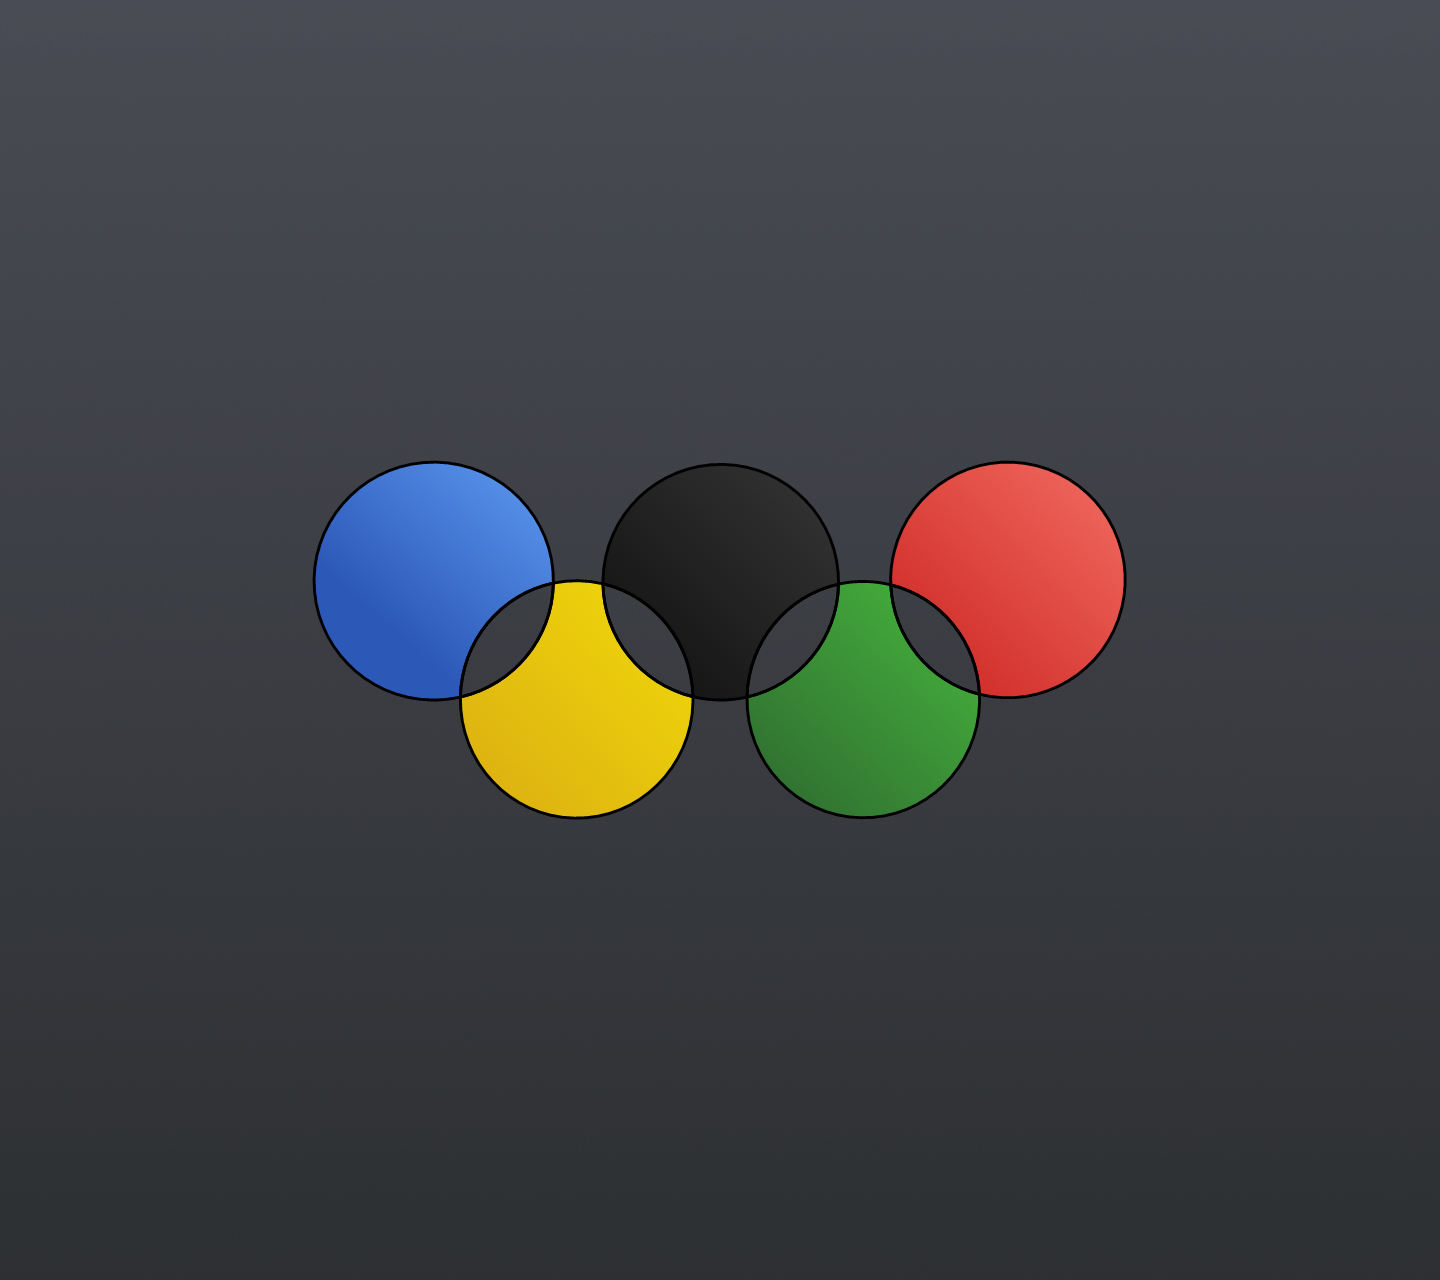 Olympic Rings Wallpaper by timb0slice7 on DeviantArt